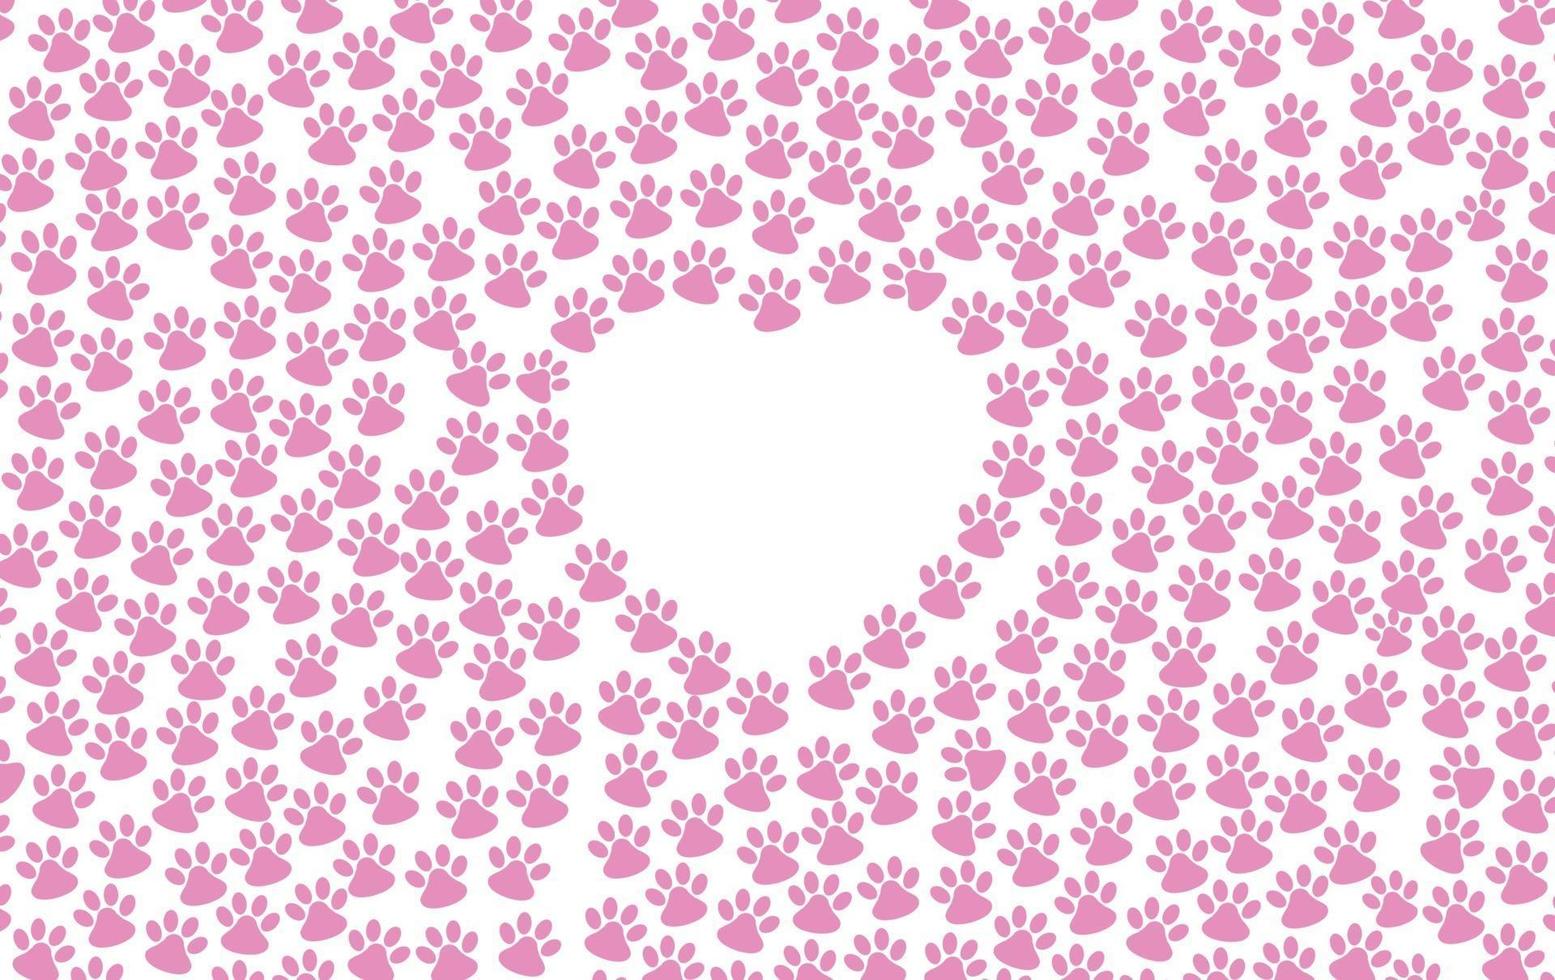 heart shape animal paw pattern background vector